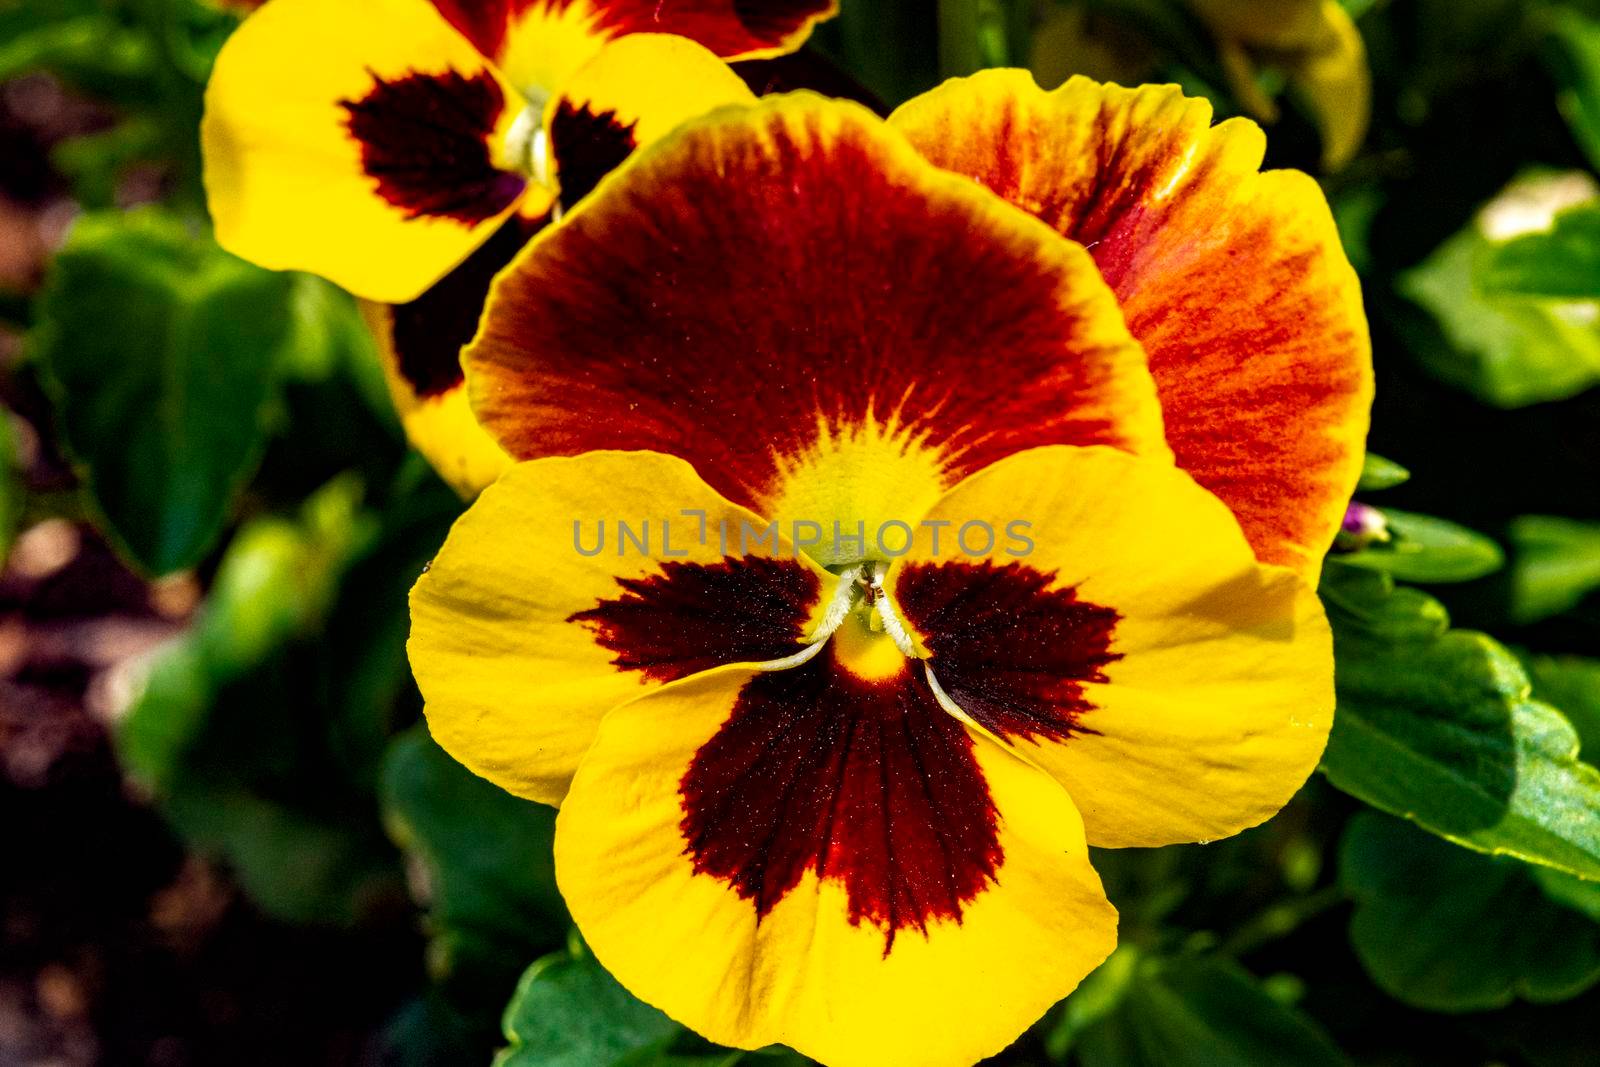 Close-up of a Pansy flower with pollen while waiting for insects